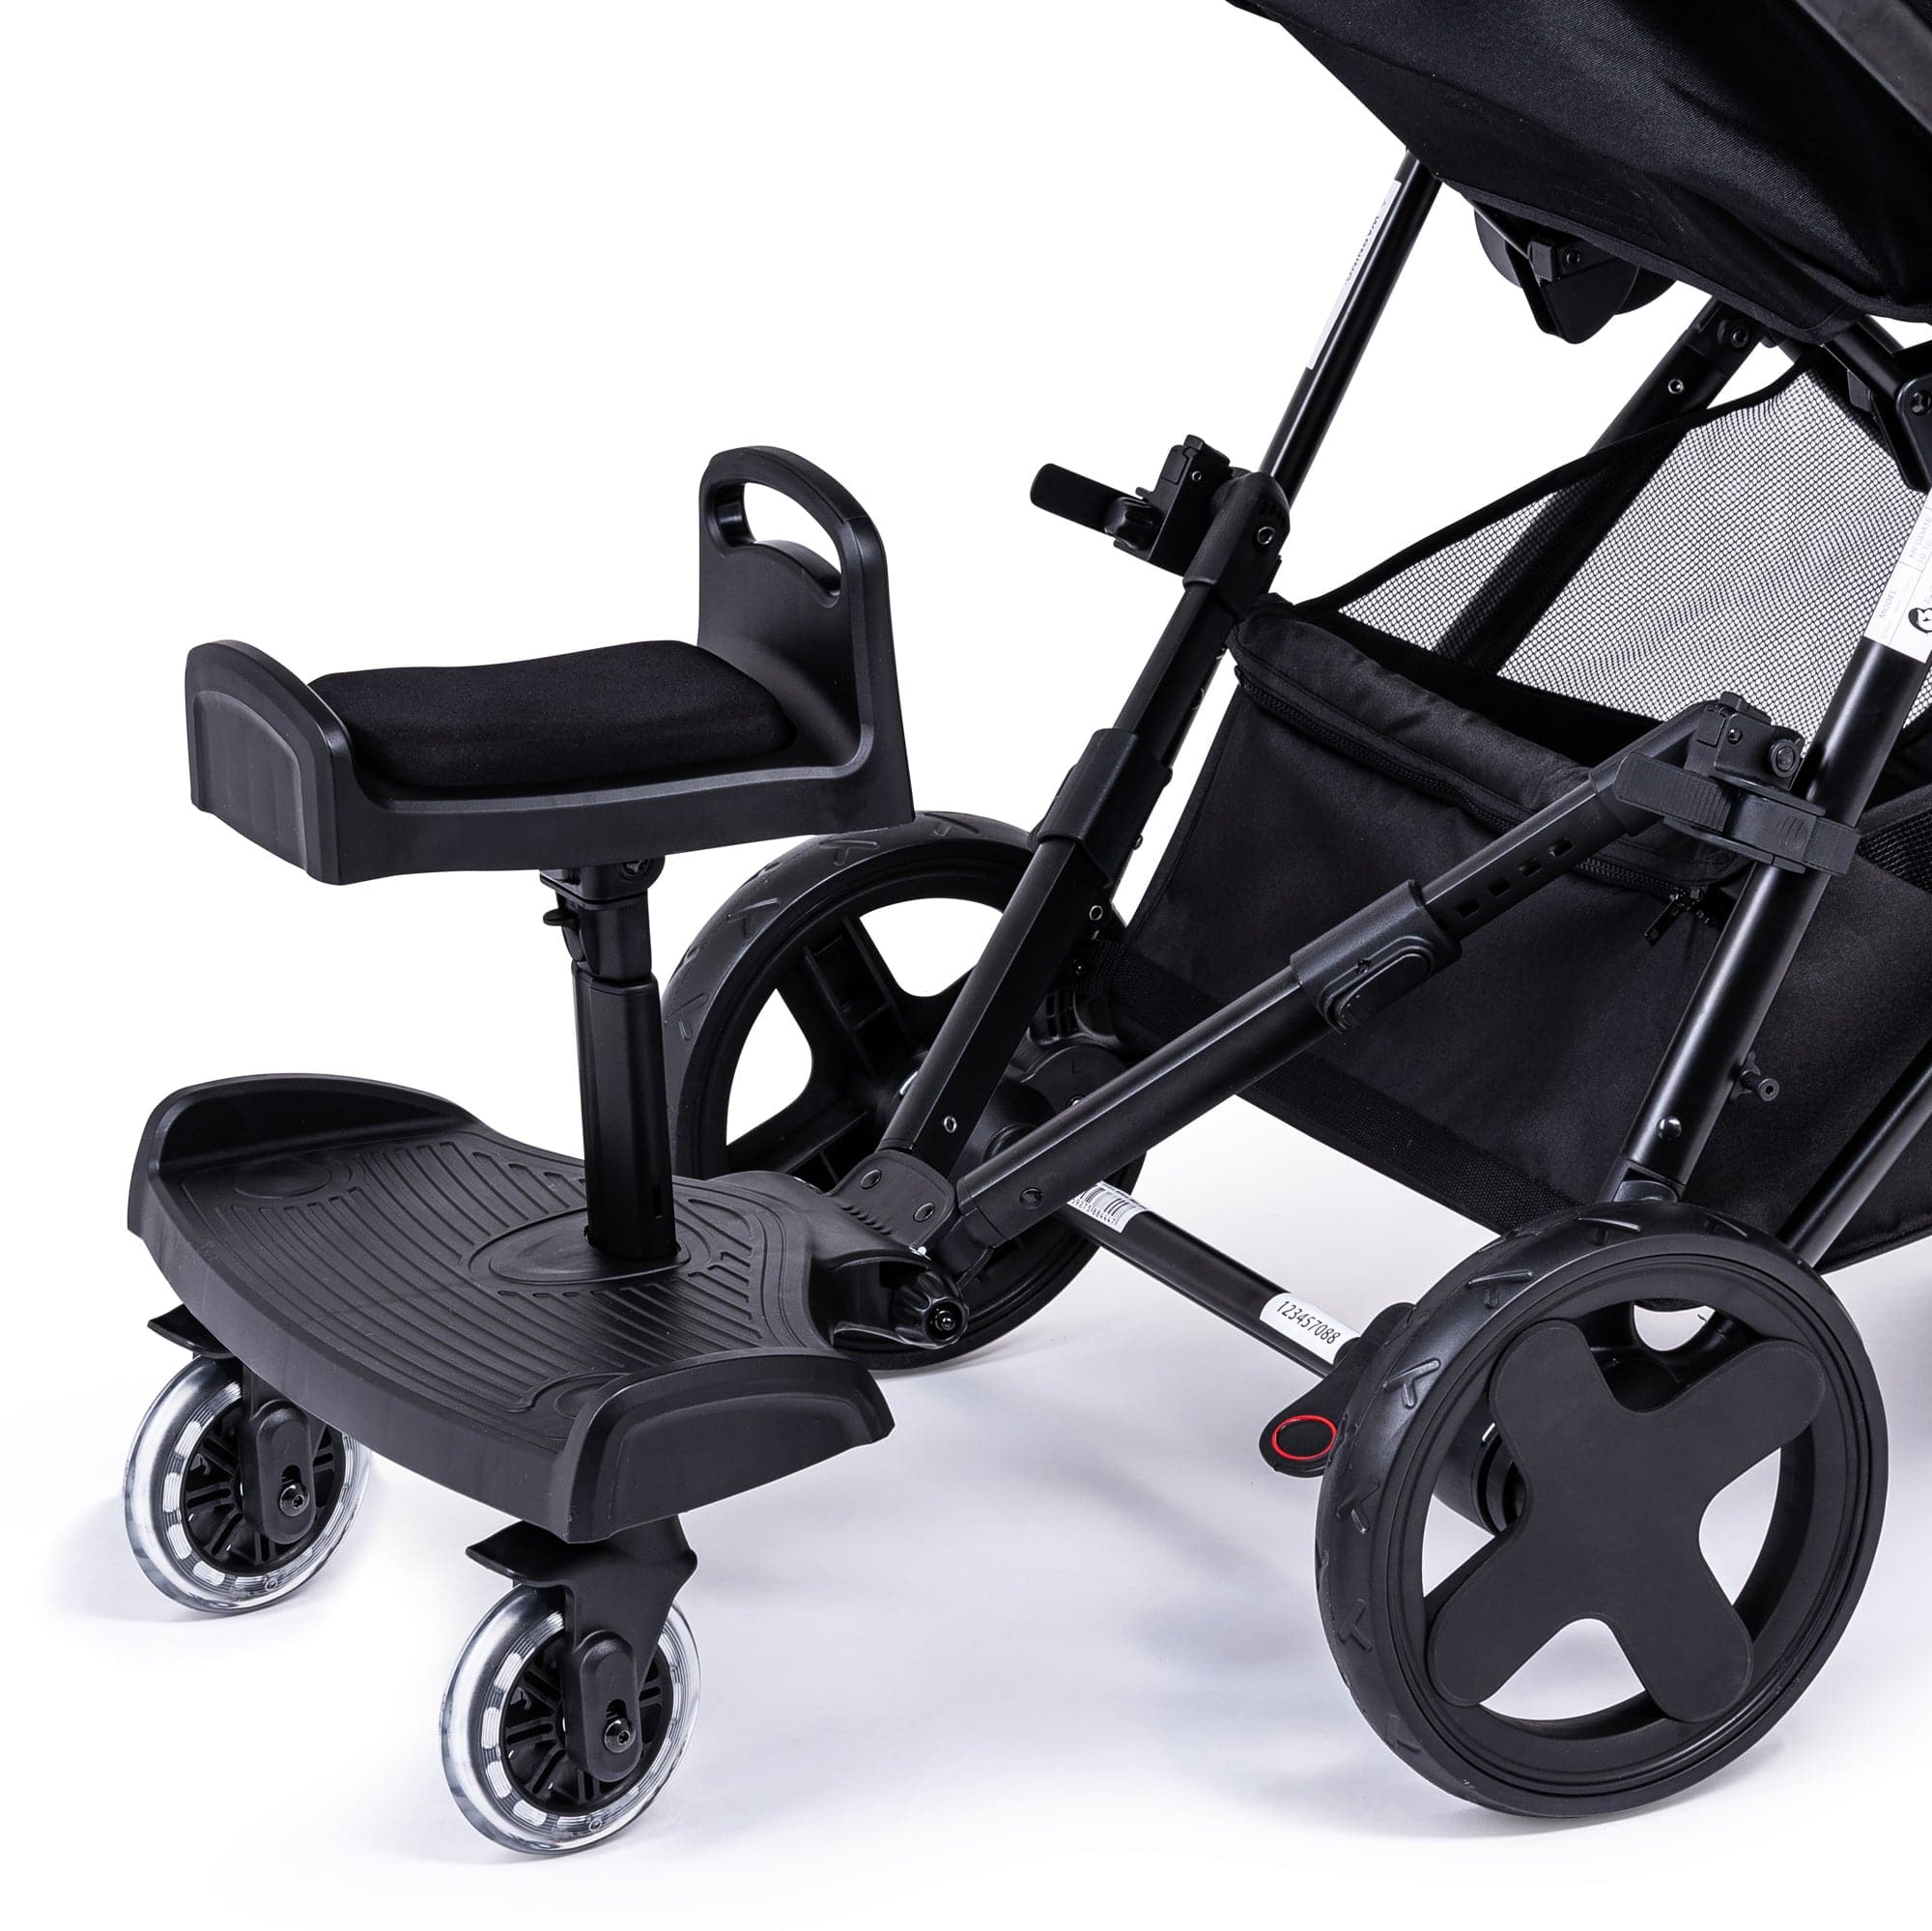 Ride On Board with Seat Compatible with Greentom - For Your Little One